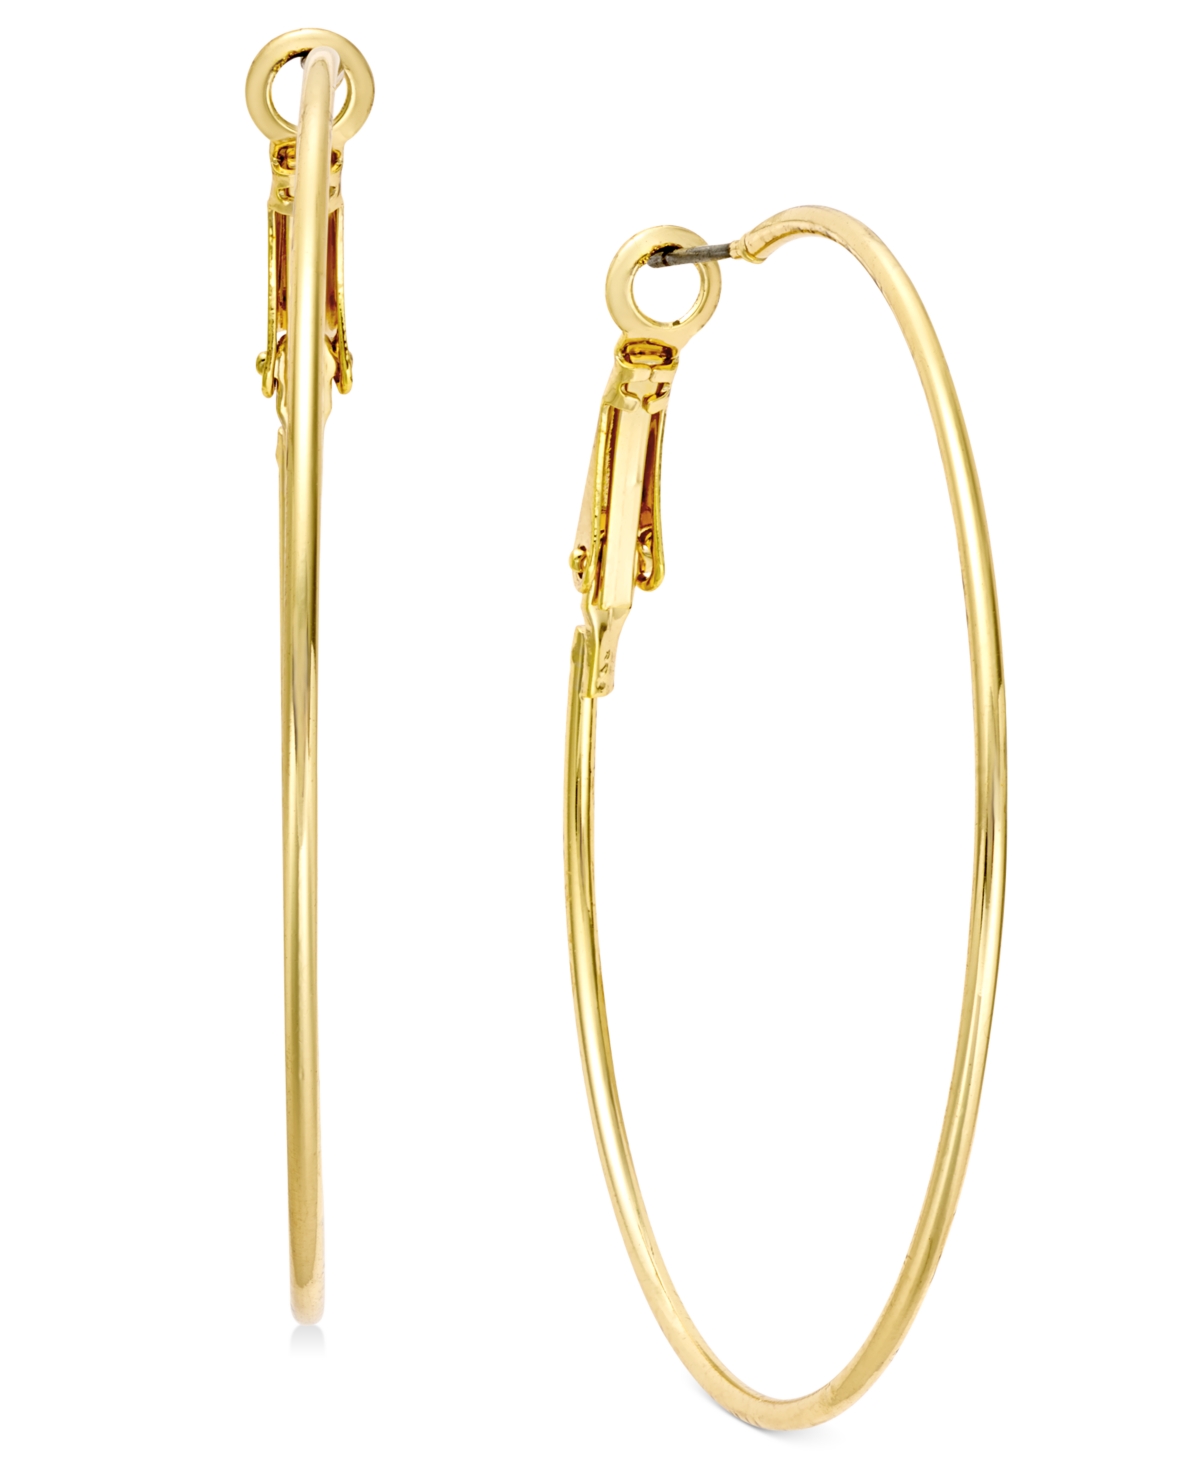 Large 2" Gold Tone Wire Hoop Earrings, Created for Macy's - Gold